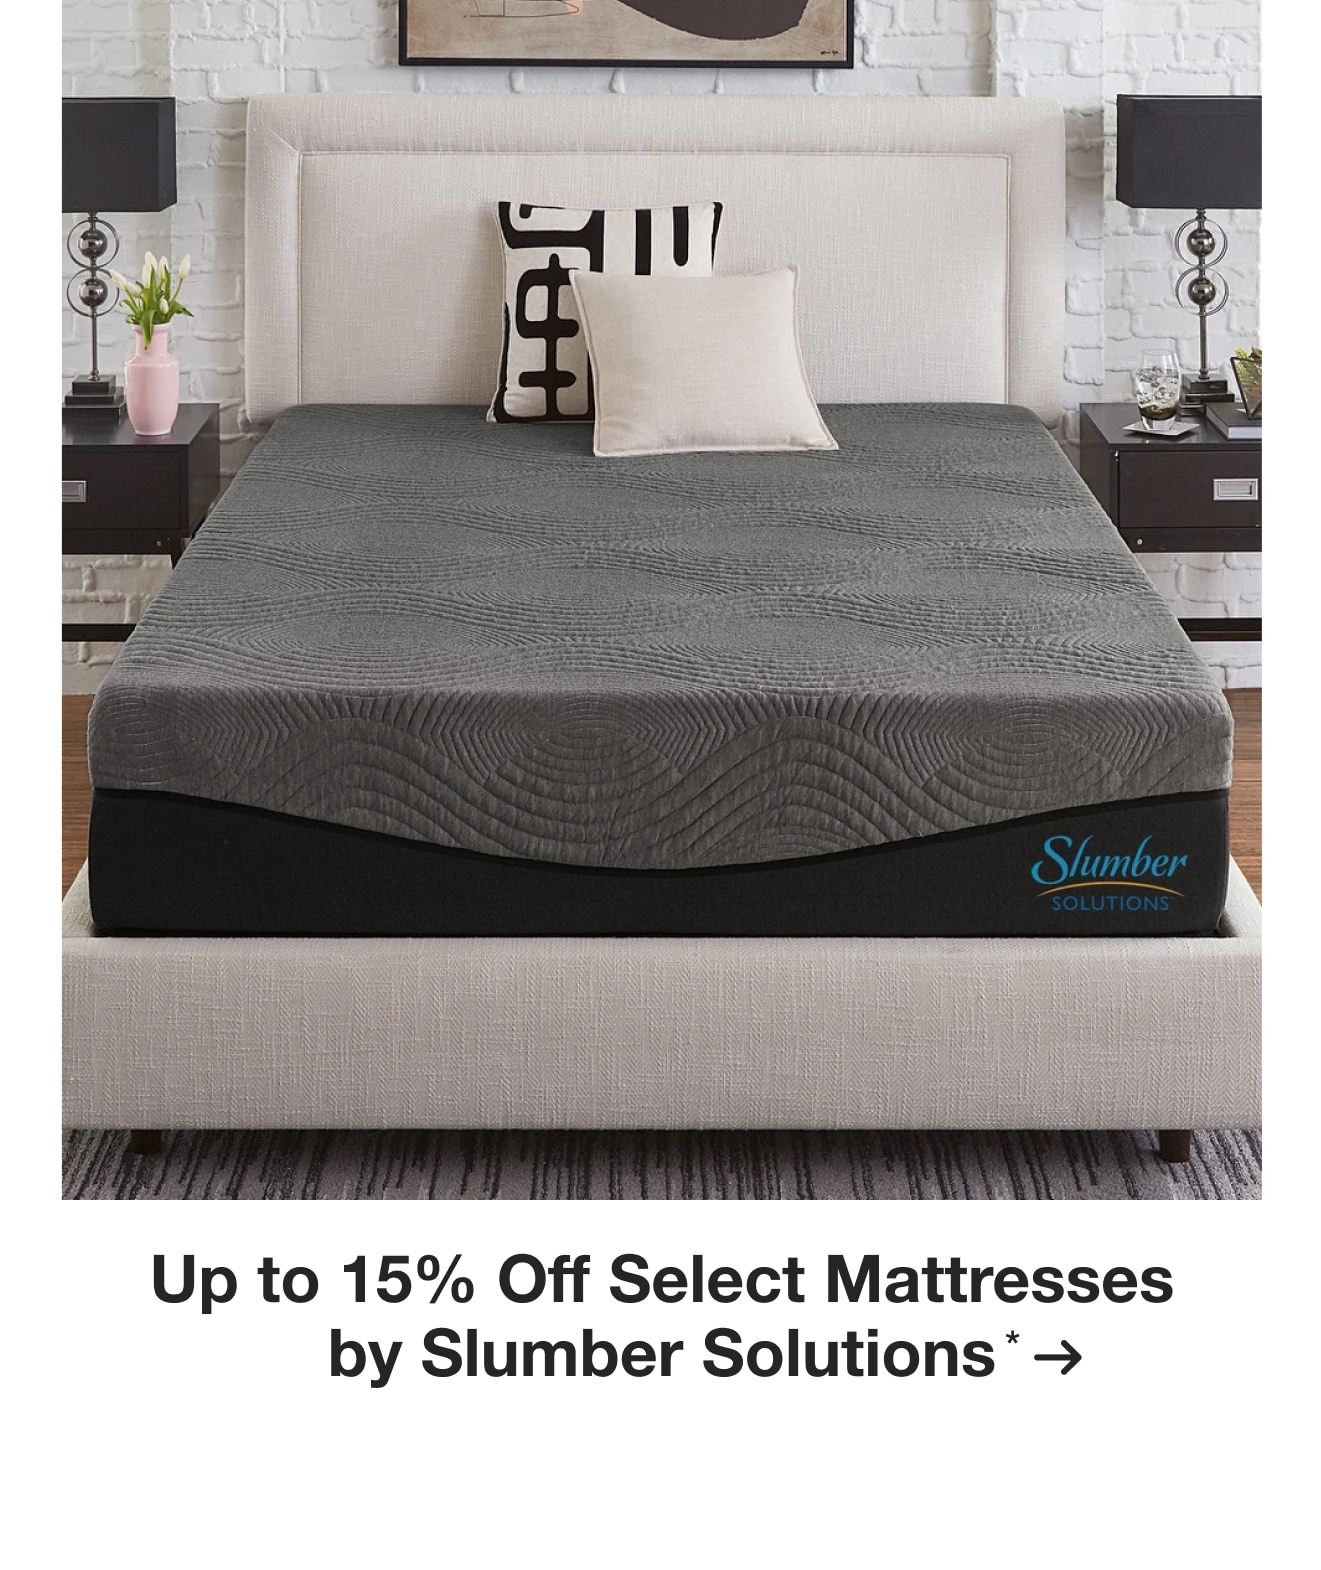 Up to 15% Off Select Mattresses by Slumber Solutions*